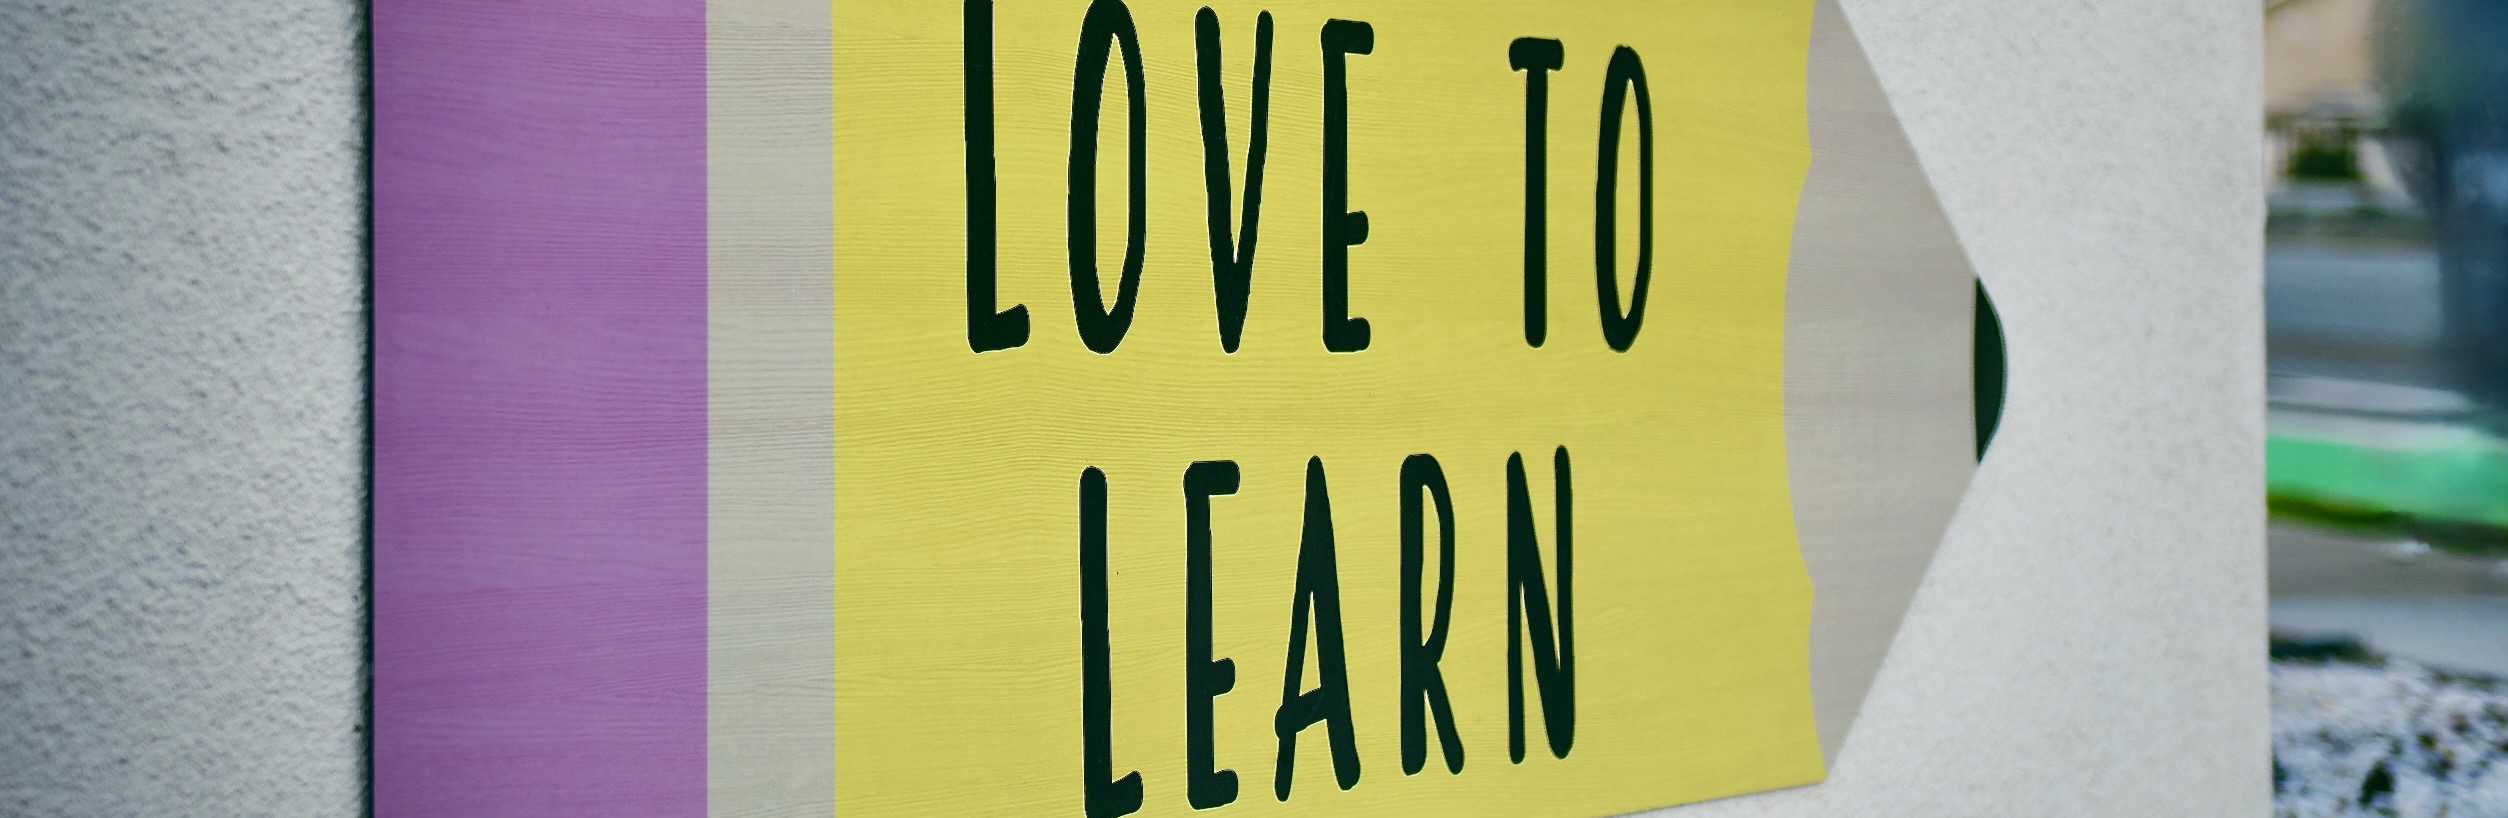 Love to learn sign